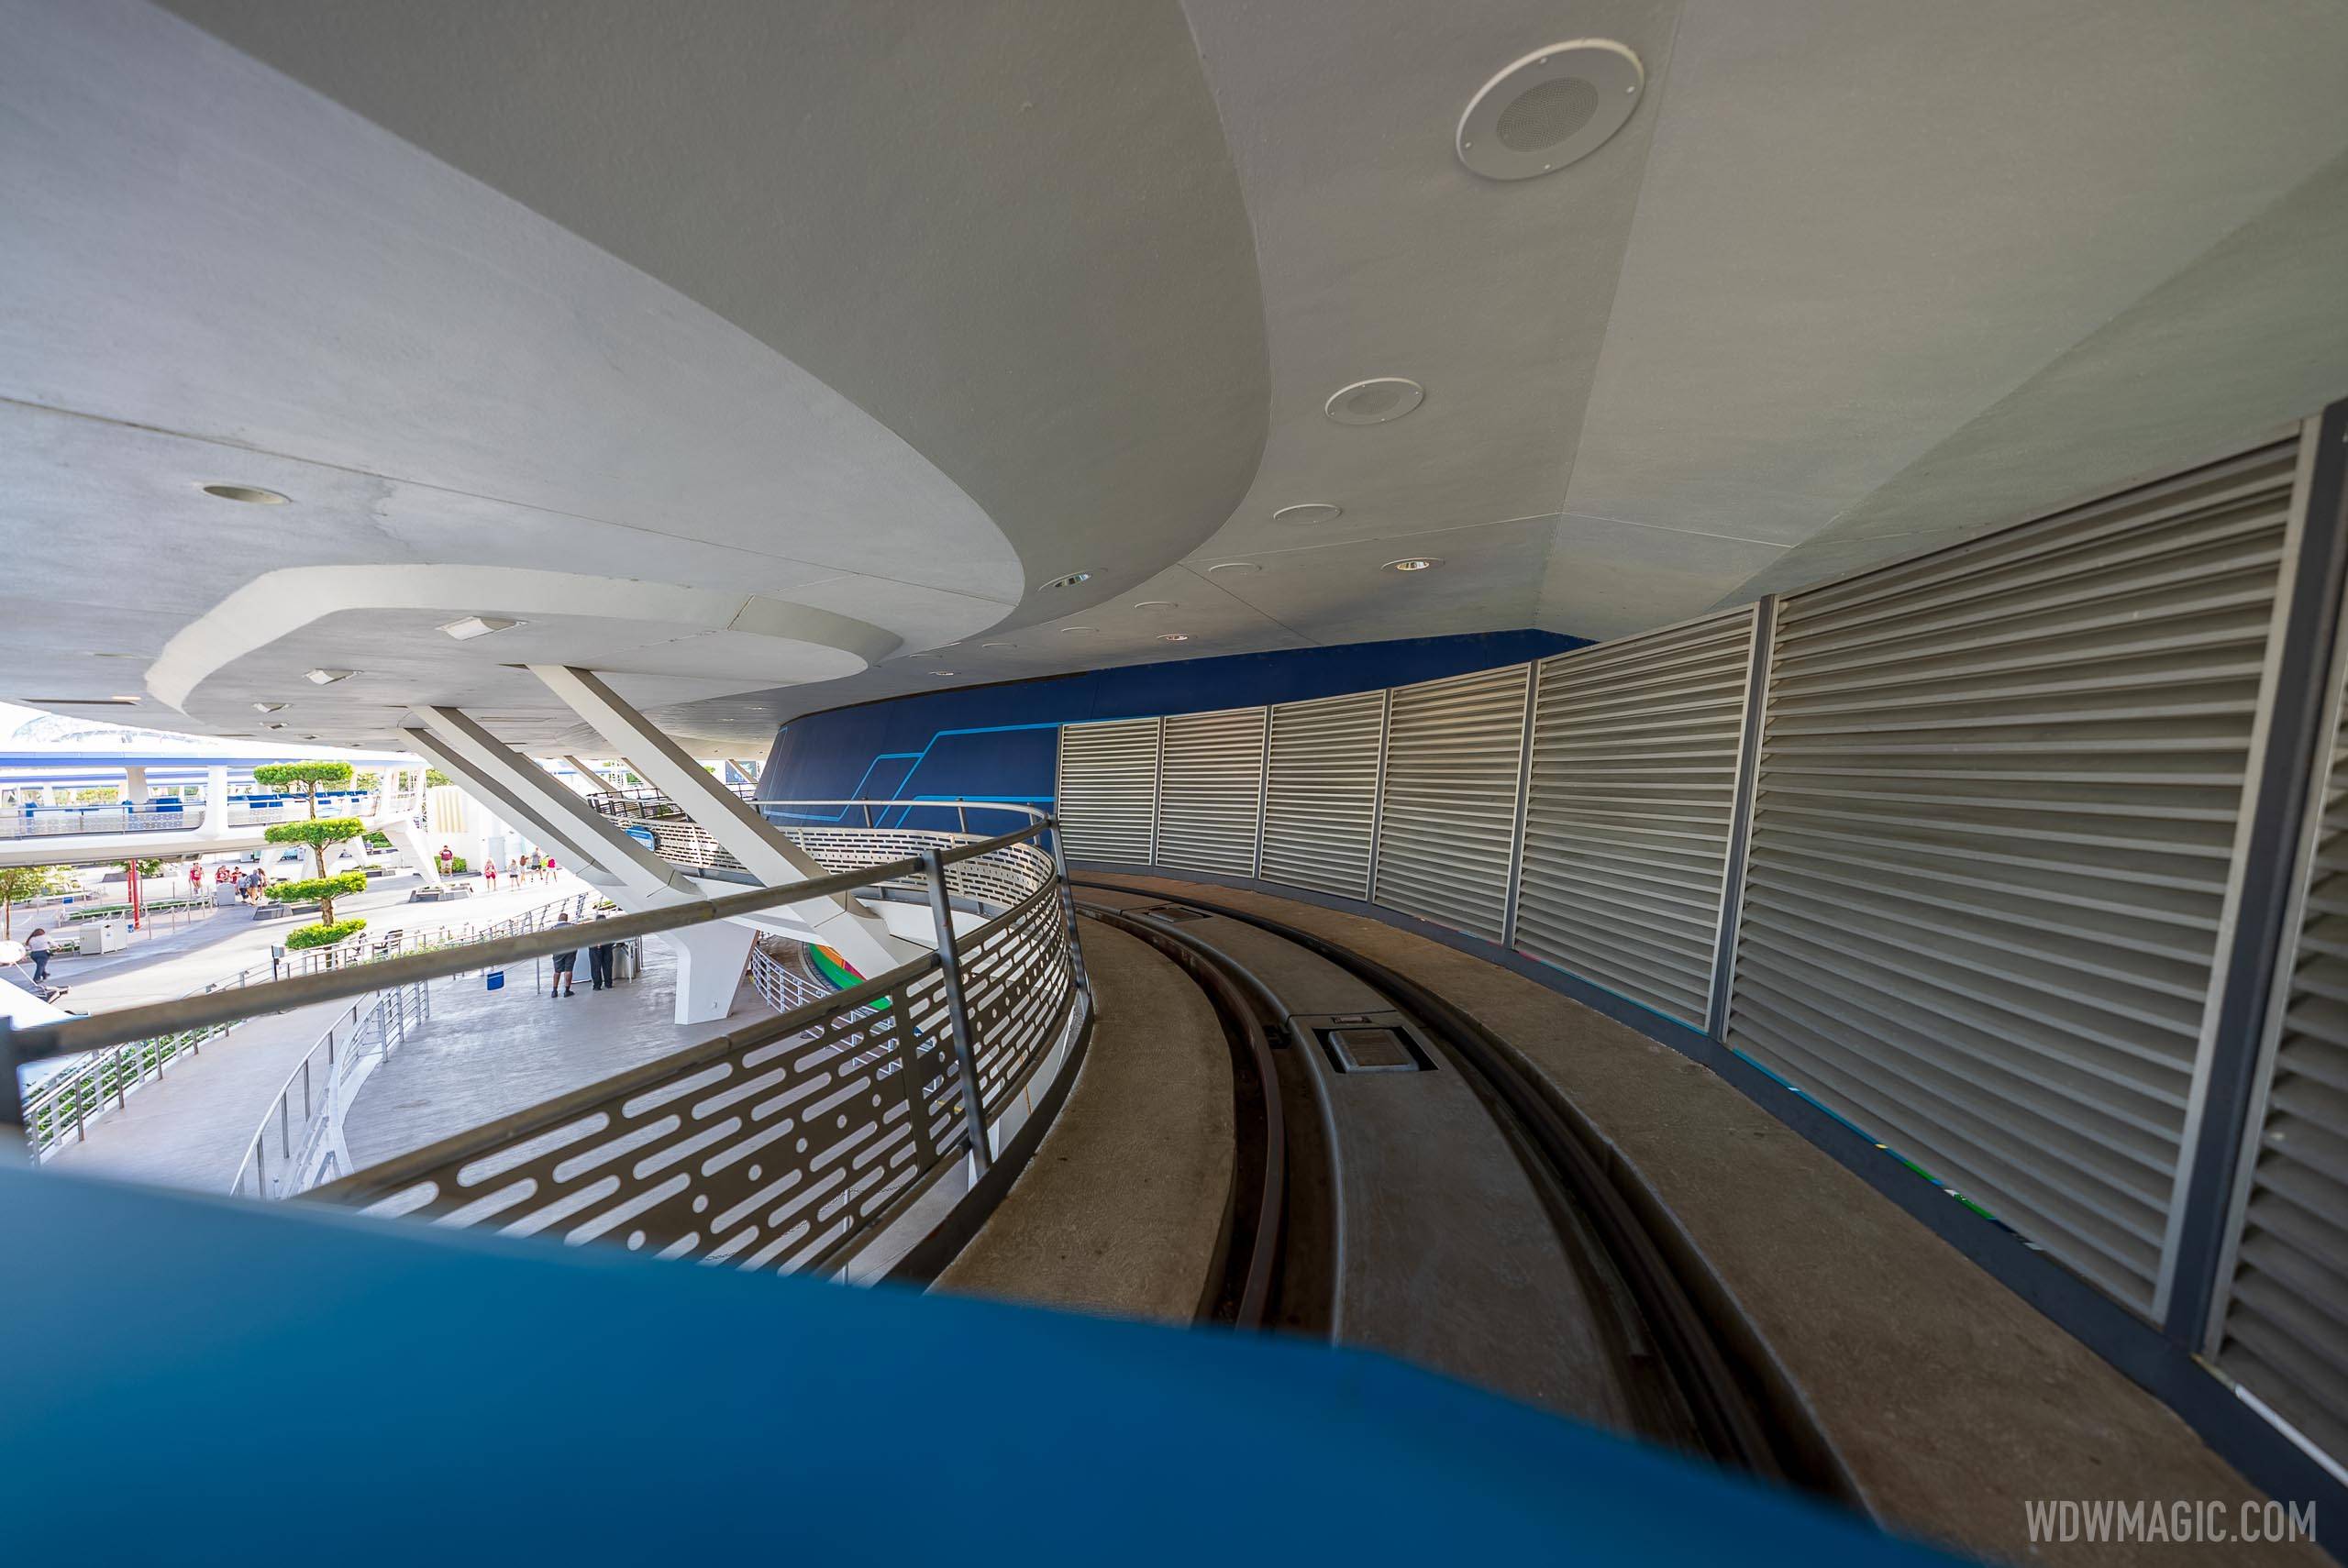 Tomorrowland Transit Authority PeopleMover remains closed since Monday breakdown